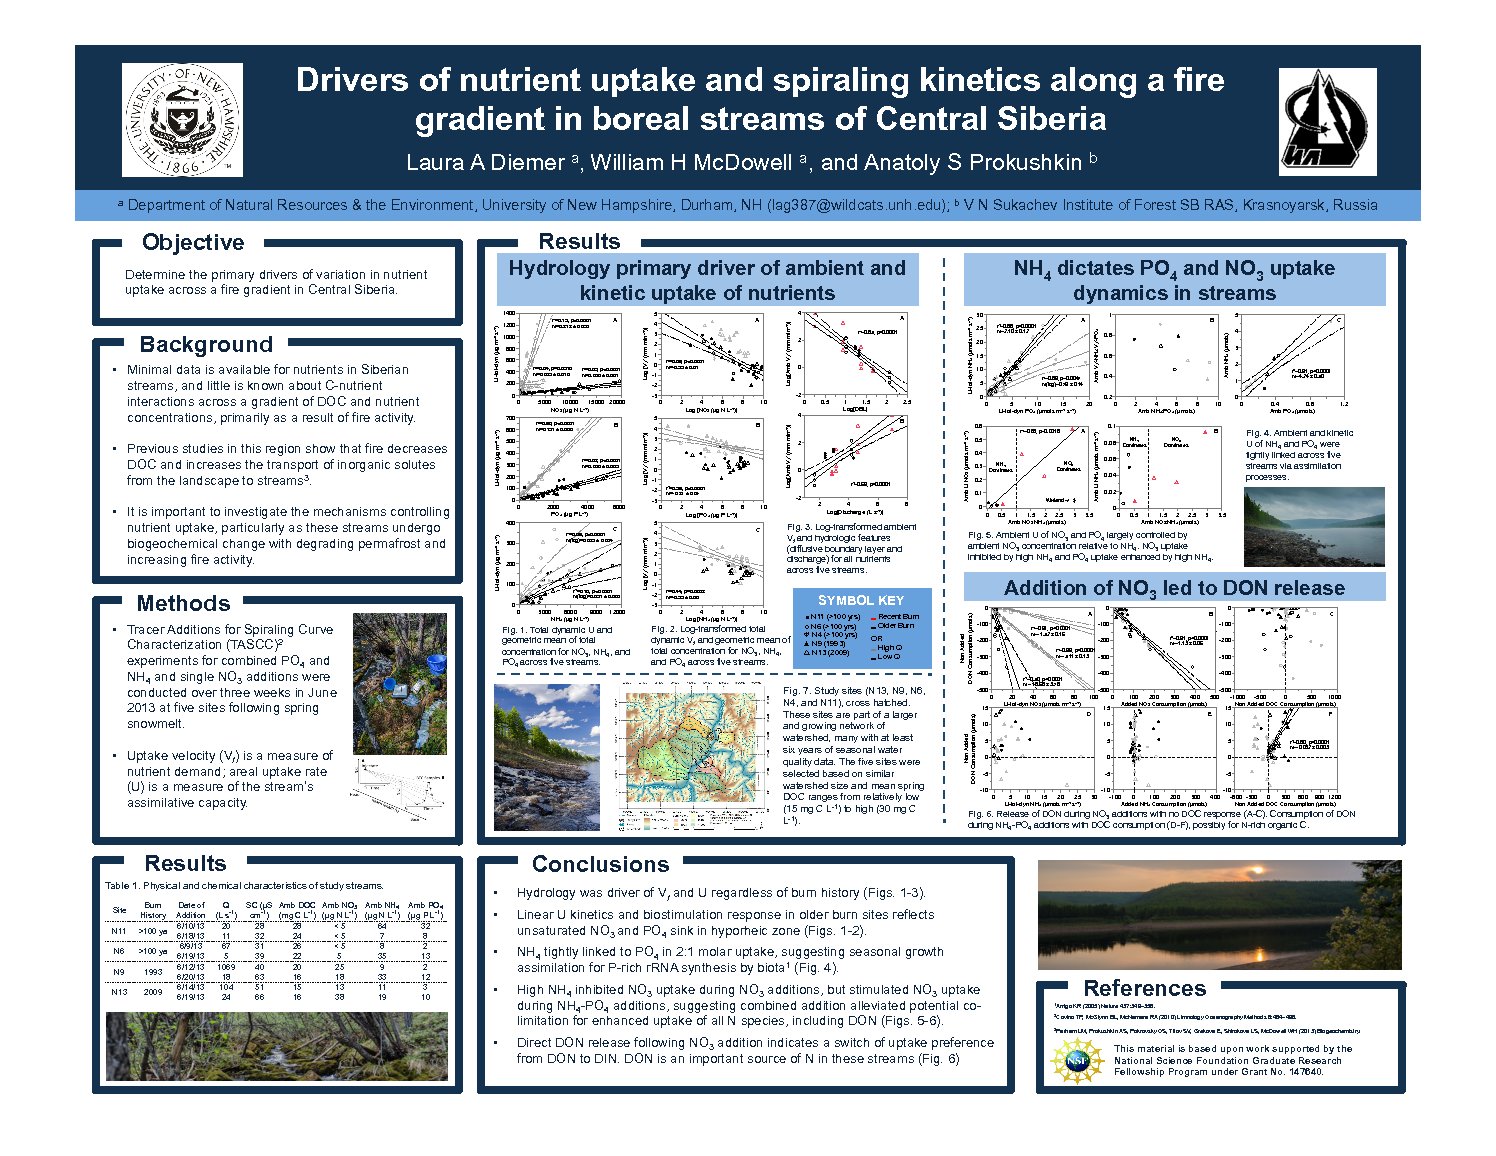 Drivers Of Nutrient Uptake And Spiraling Kinetics Along A Fire Gradient In Boreal Streams Of Central Siberia by lag387